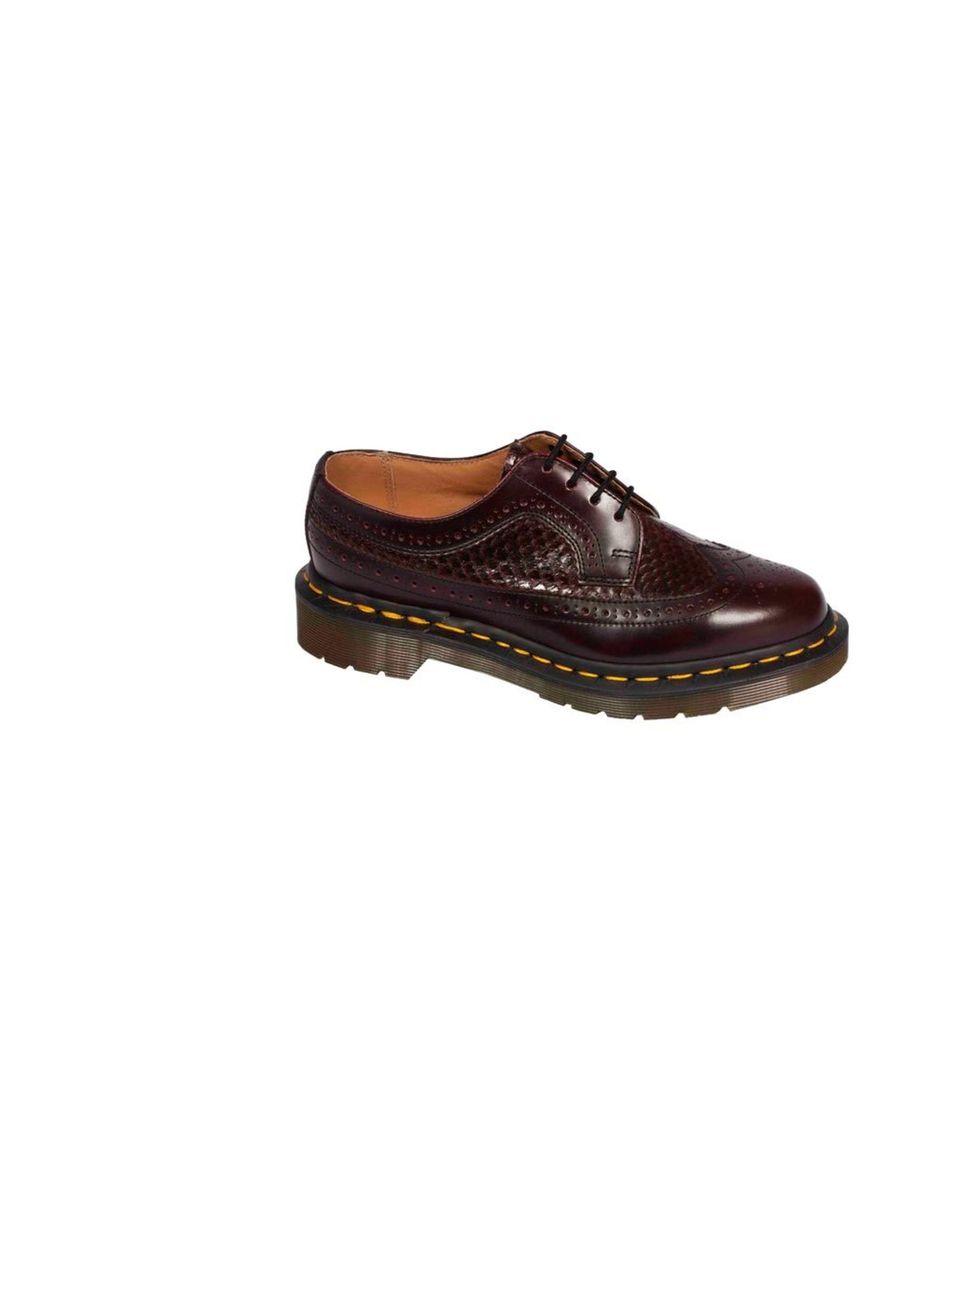 <p><a href="http://www.drmartens.com/">Dr. Marten</a> classic brogue, £200</p><p>The MIE collection is manufactured at Dr. Marten's original Northampton factory using decades-old techniques.</p>